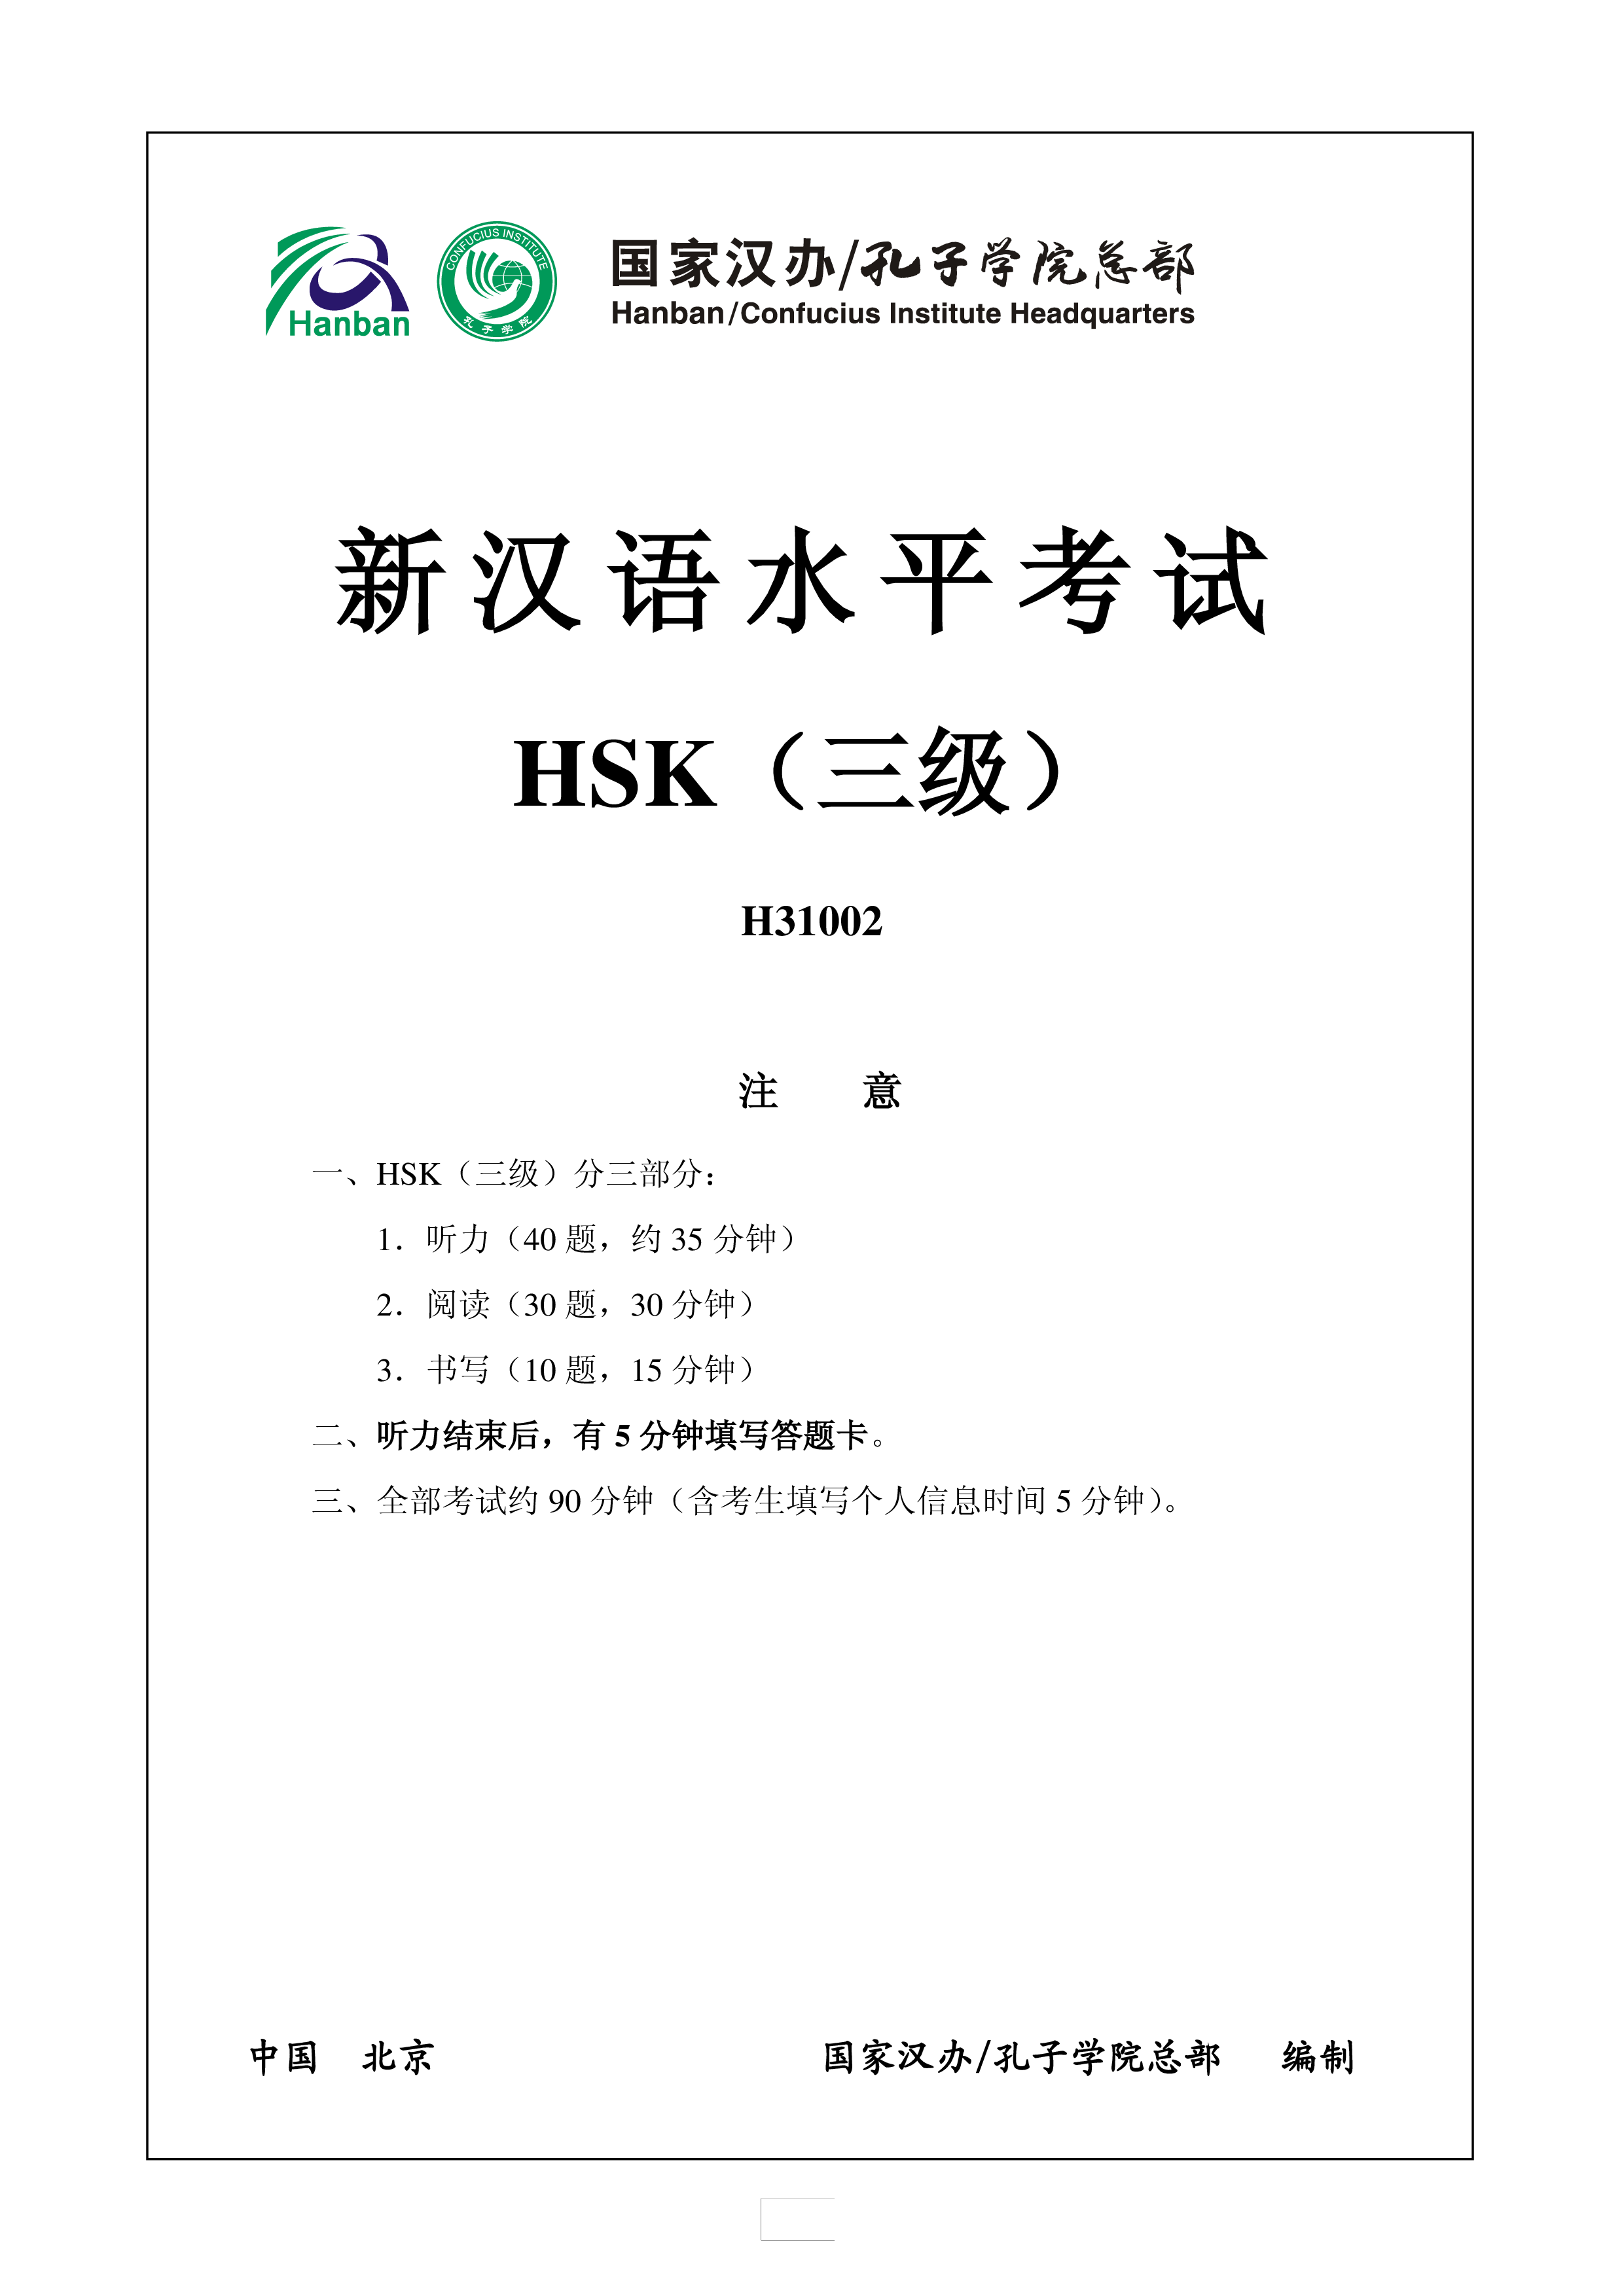 hsk3 chinese exam including answers hsk3 h31002 plantilla imagen principal